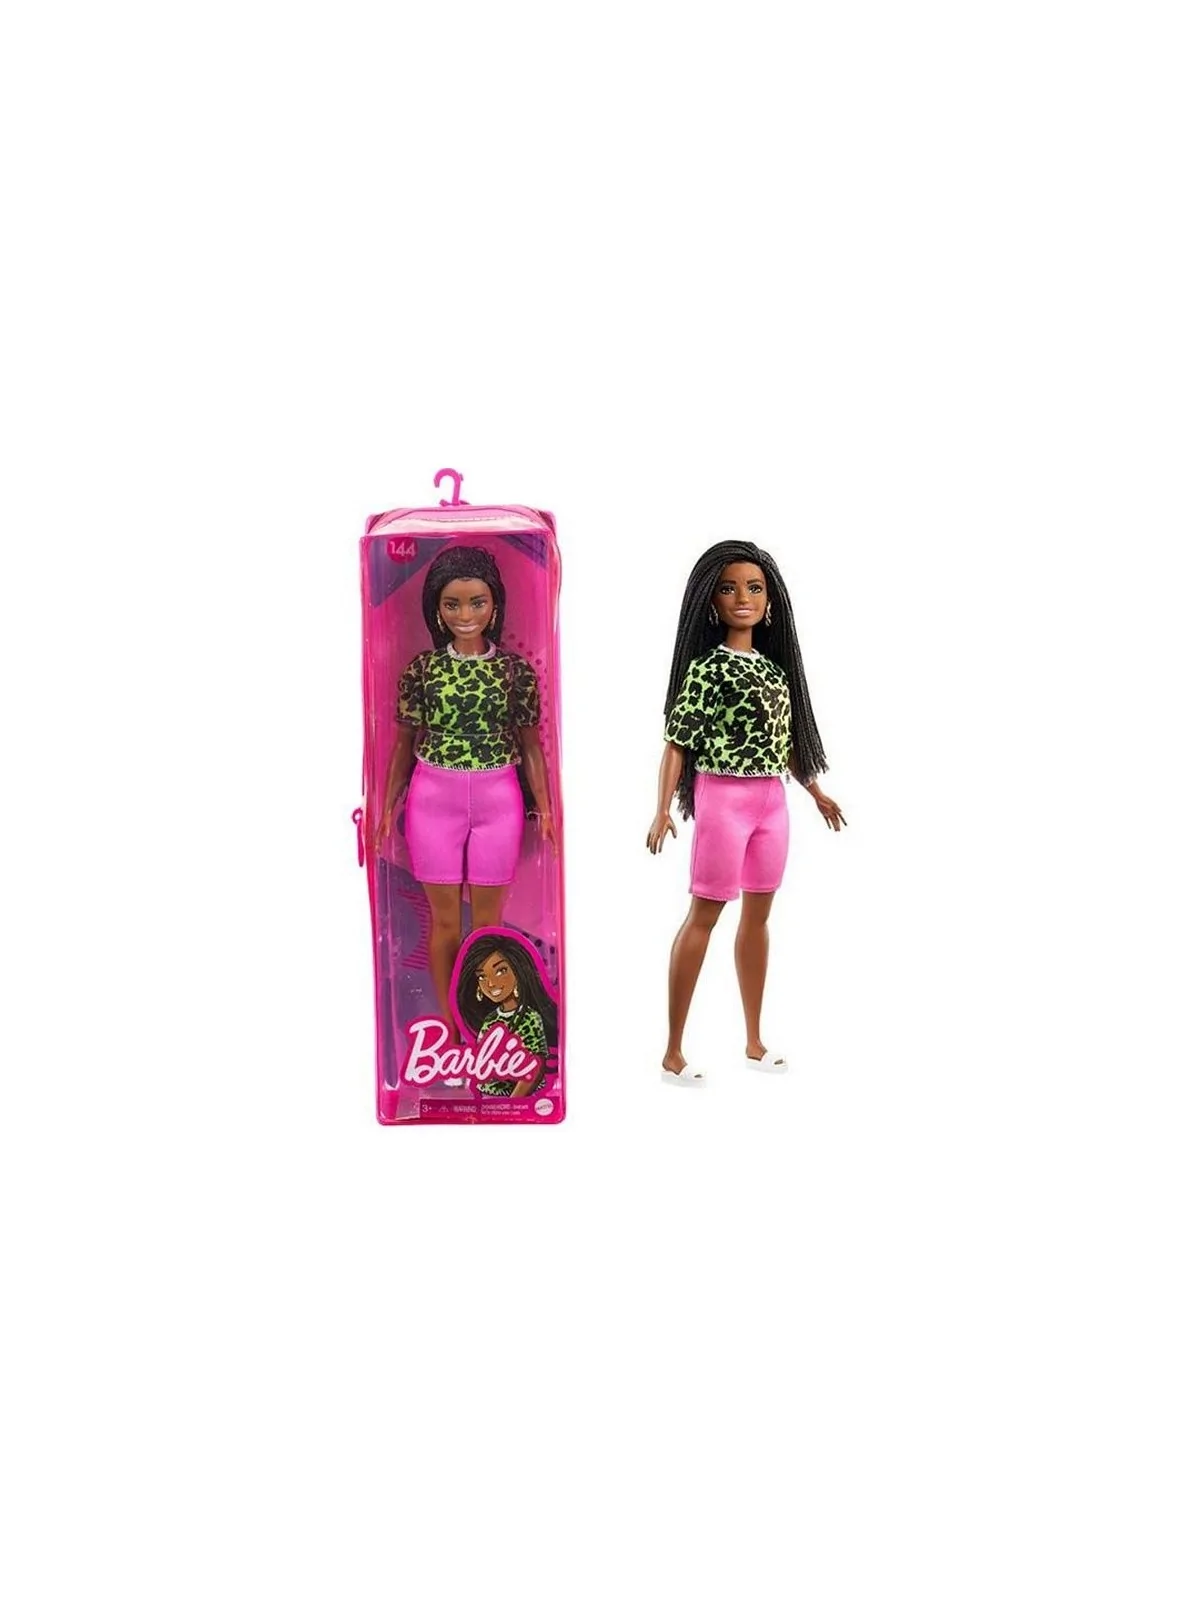 Barbie Fafhionistas Doll in Bag As3